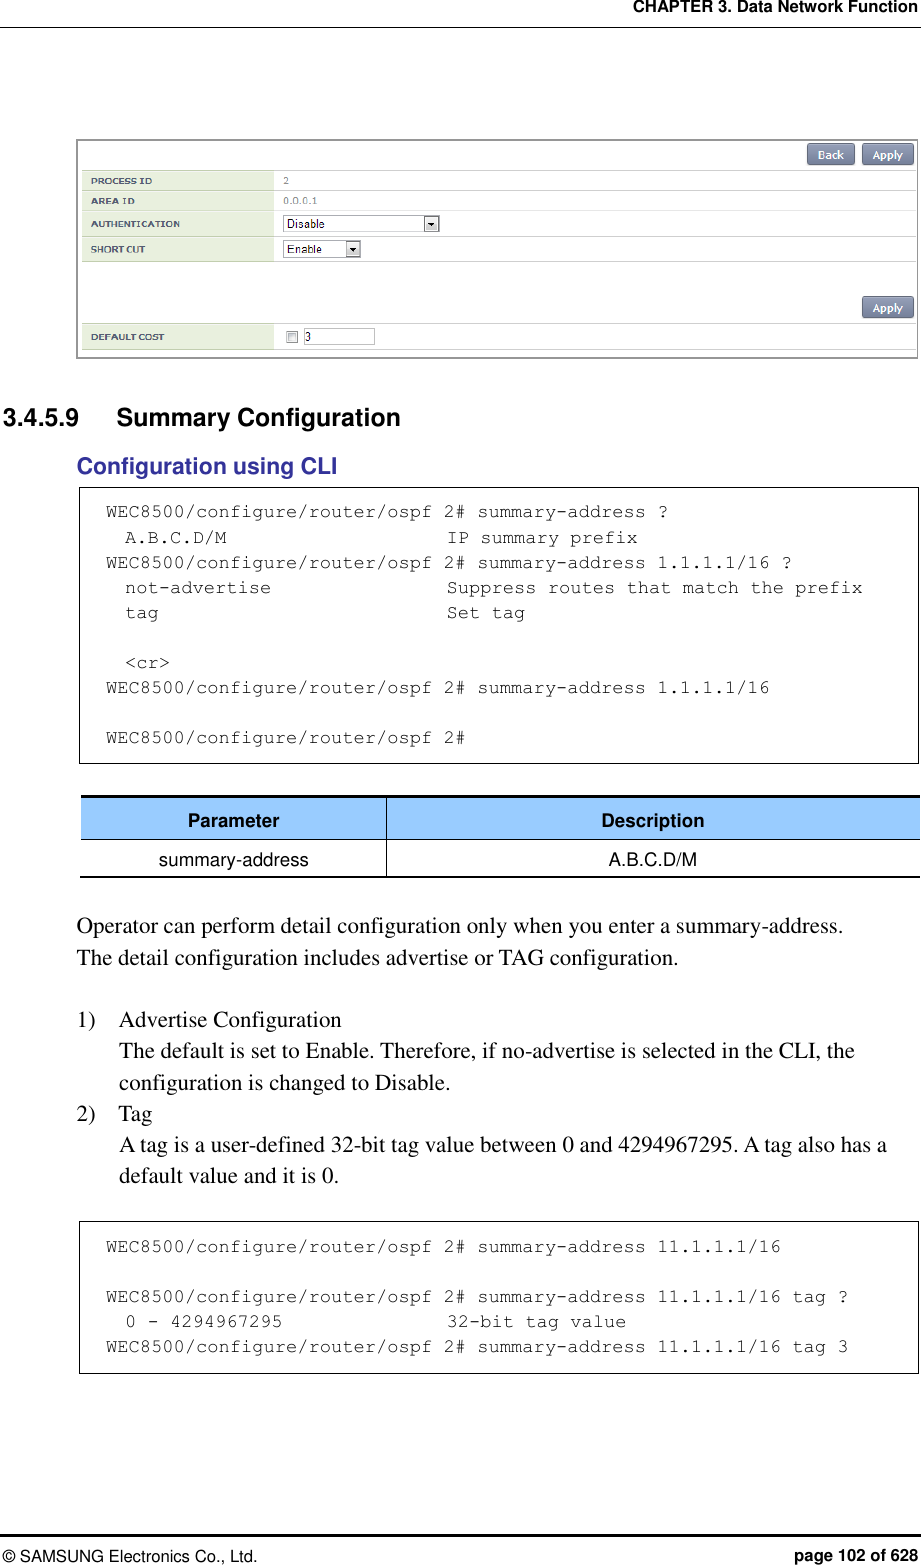 CHAPTER 3. Data Network Function ©  SAMSUNG Electronics Co., Ltd.  page 102 of 628   3.4.5.9  Summary Configuration Configuration using CLI WEC8500/configure/router/ospf 2# summary-address ?   A.B.C.D/M                        IP summary prefix WEC8500/configure/router/ospf 2# summary-address 1.1.1.1/16 ?   not-advertise                   Suppress routes that match the prefix   tag                               Set tag    &lt;cr&gt; WEC8500/configure/router/ospf 2# summary-address 1.1.1.1/16   WEC8500/configure/router/ospf 2#  Parameter Description summary-address A.B.C.D/M  Operator can perform detail configuration only when you enter a summary-address.   The detail configuration includes advertise or TAG configuration.    1)    Advertise Configuration The default is set to Enable. Therefore, if no-advertise is selected in the CLI, the configuration is changed to Disable. 2)    Tag A tag is a user-defined 32-bit tag value between 0 and 4294967295. A tag also has a default value and it is 0.    WEC8500/configure/router/ospf 2# summary-address 11.1.1.1/16   WEC8500/configure/router/ospf 2# summary-address 11.1.1.1/16 tag ?   0 - 4294967295                  32-bit tag value WEC8500/configure/router/ospf 2# summary-address 11.1.1.1/16 tag 3  